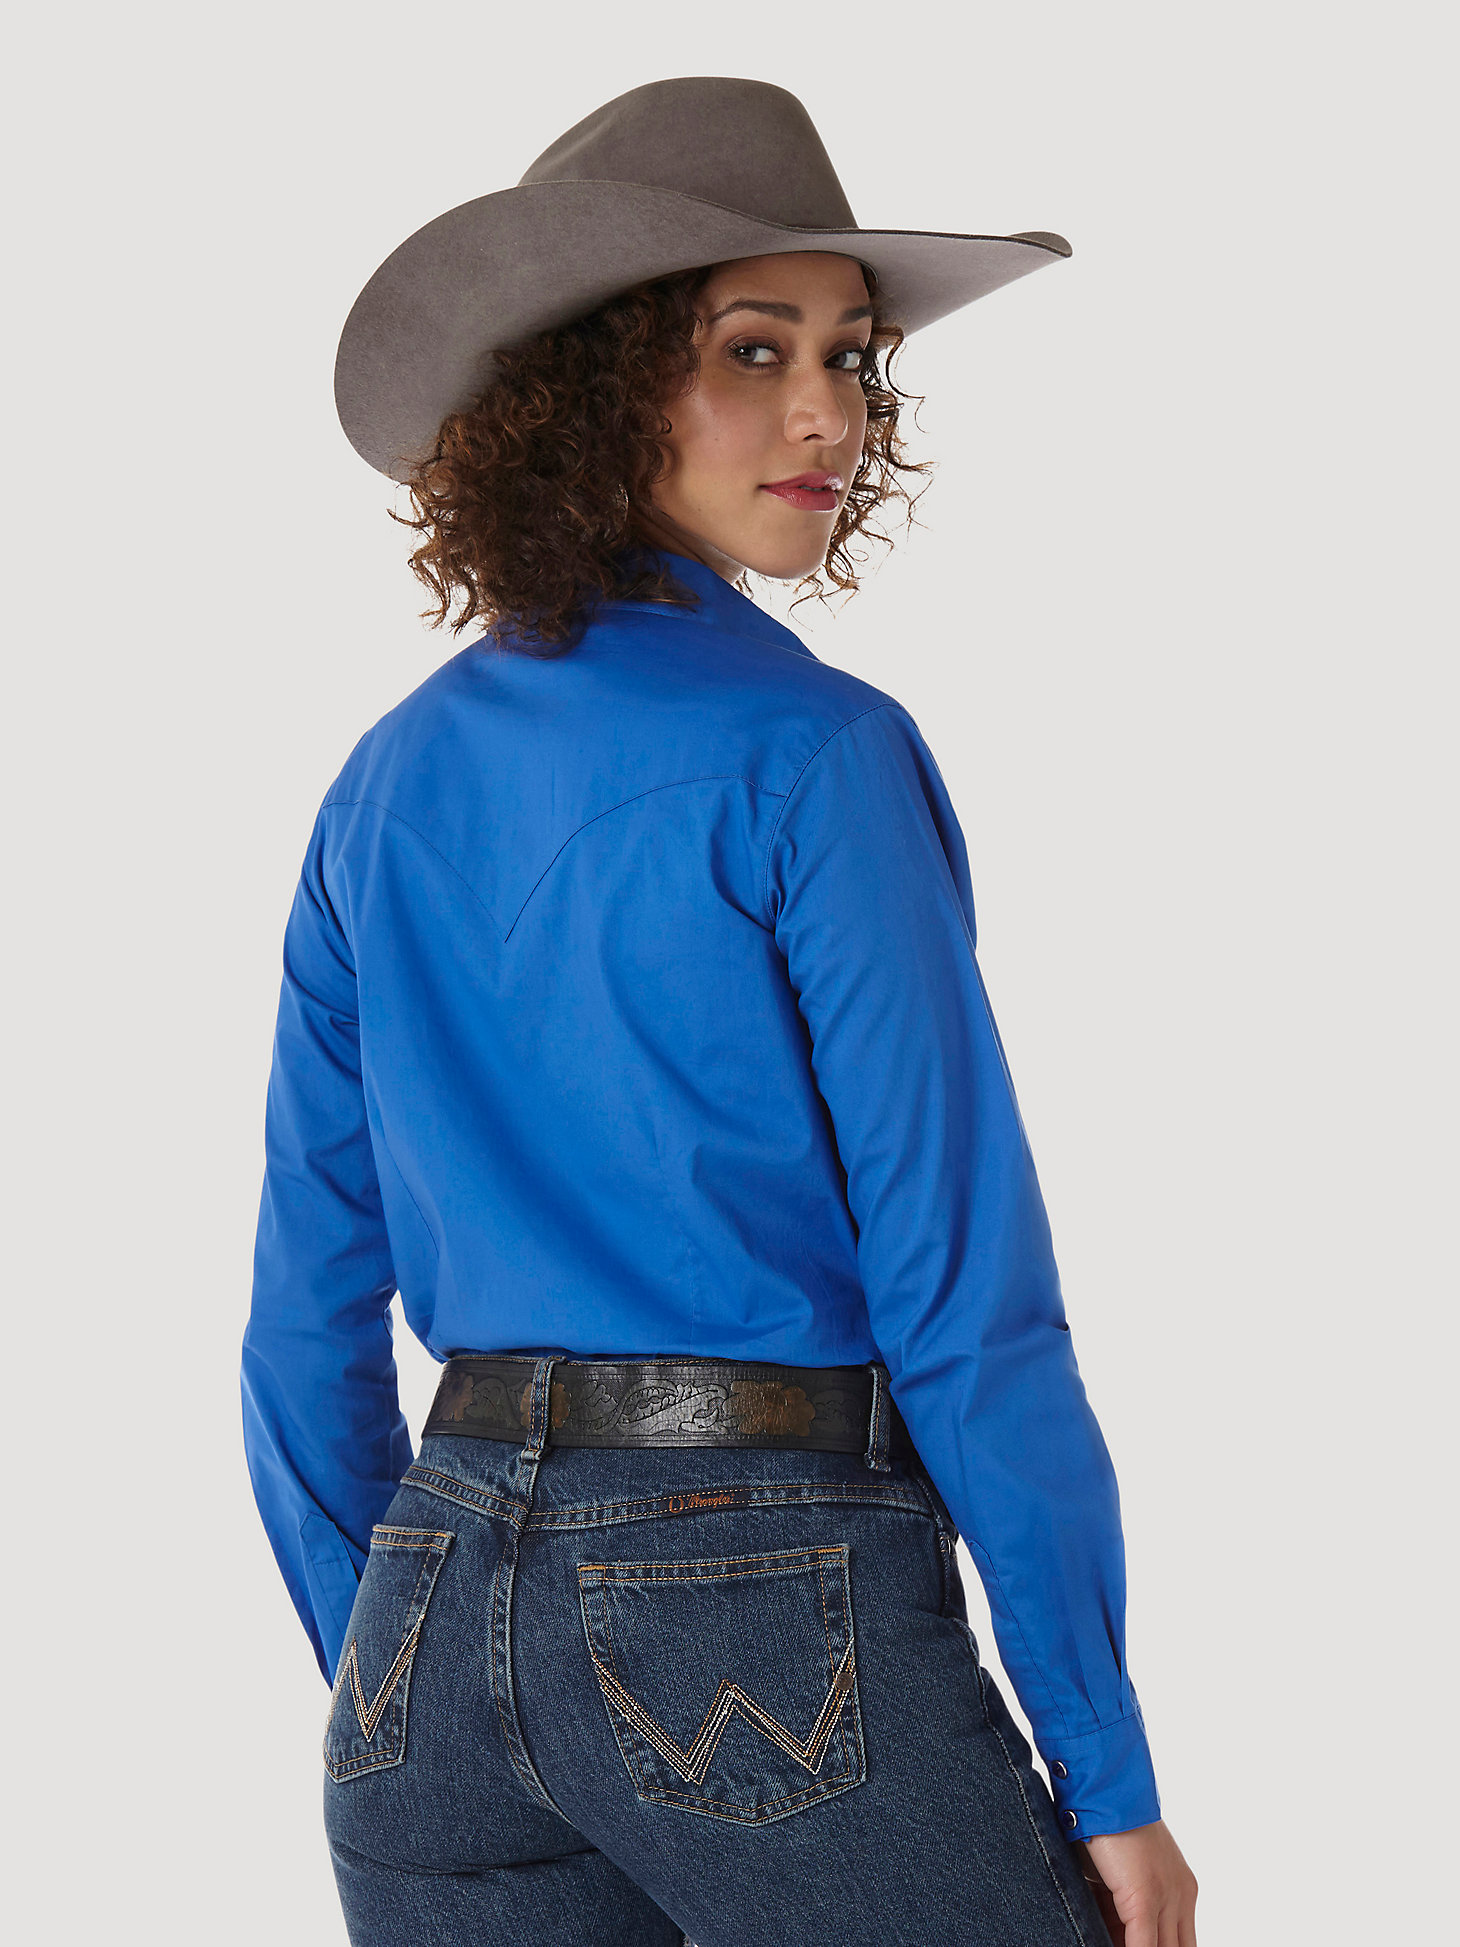 Wrangler® Long Sleeve One Point Front and Back Yokes Solid Top in Royal alternative view 1